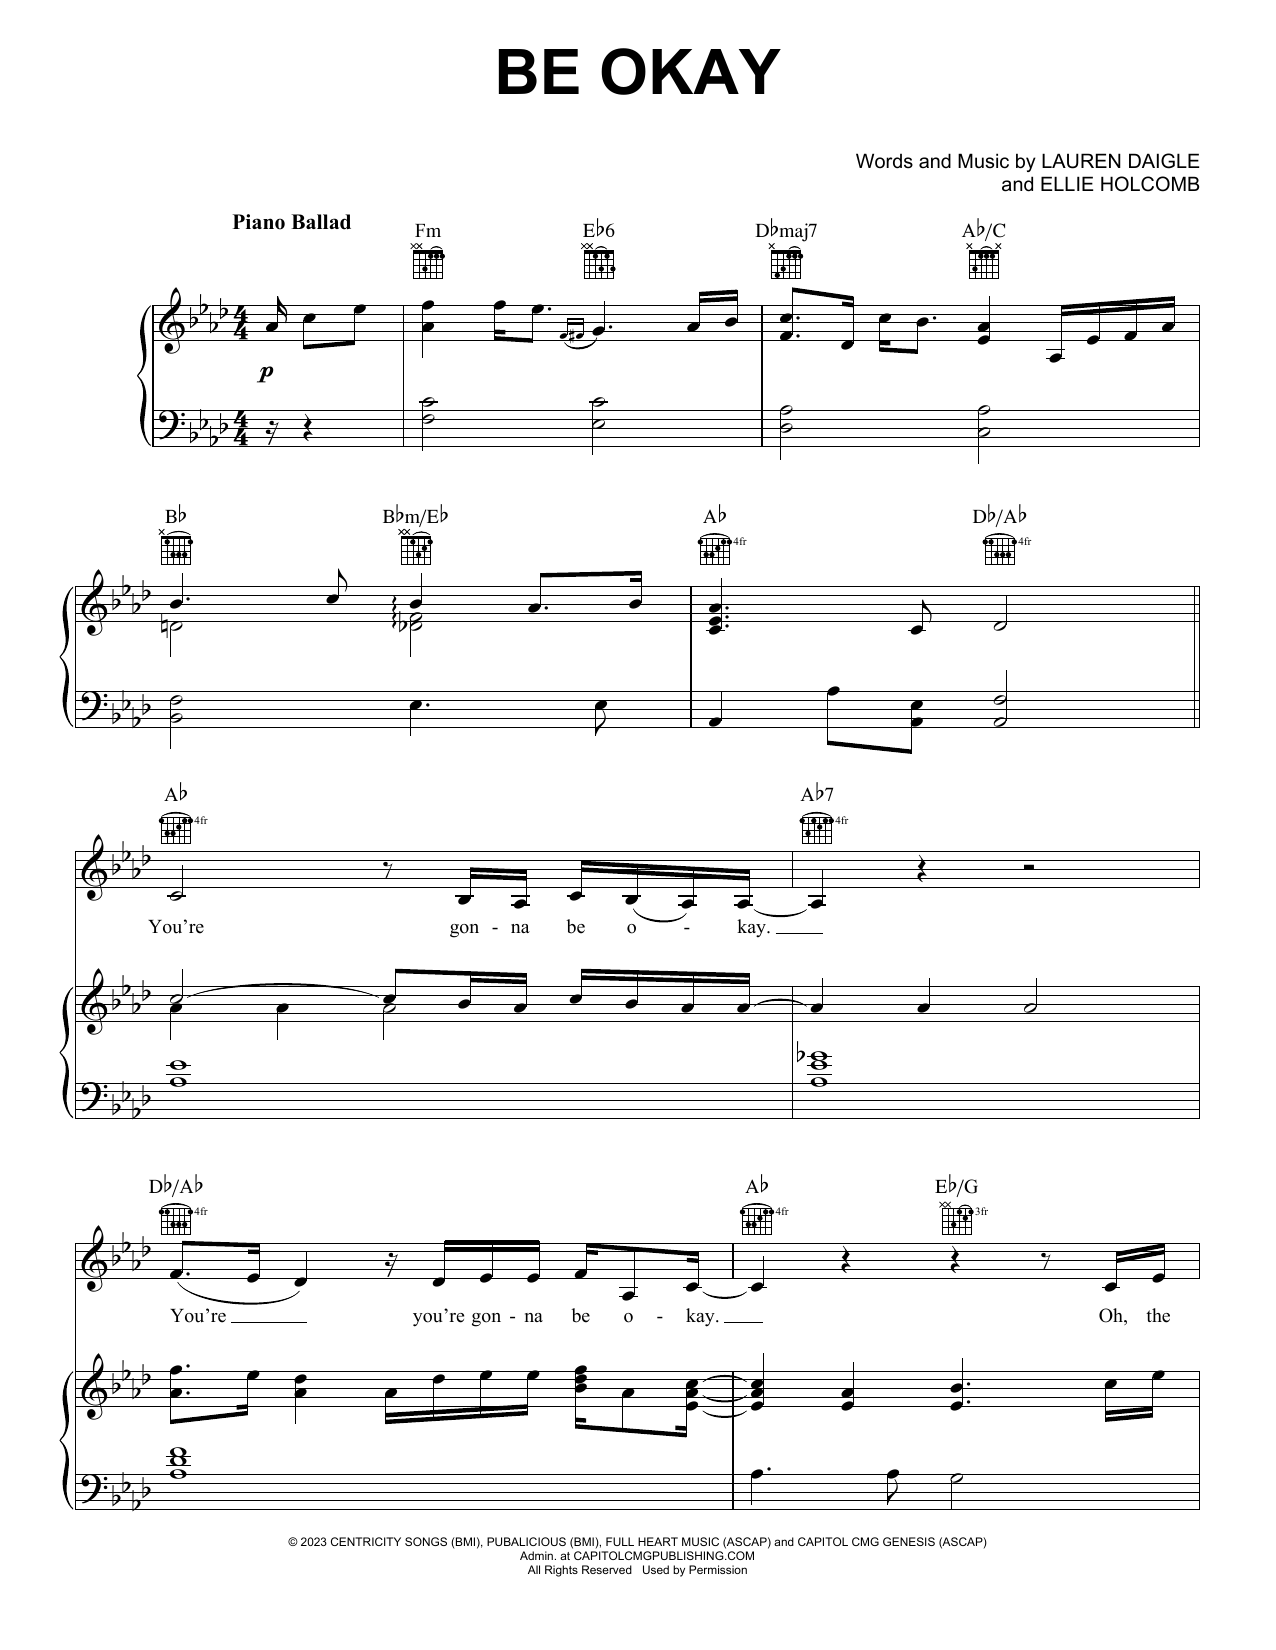 Lauren Daigle Be Okay sheet music notes and chords. Download Printable PDF.